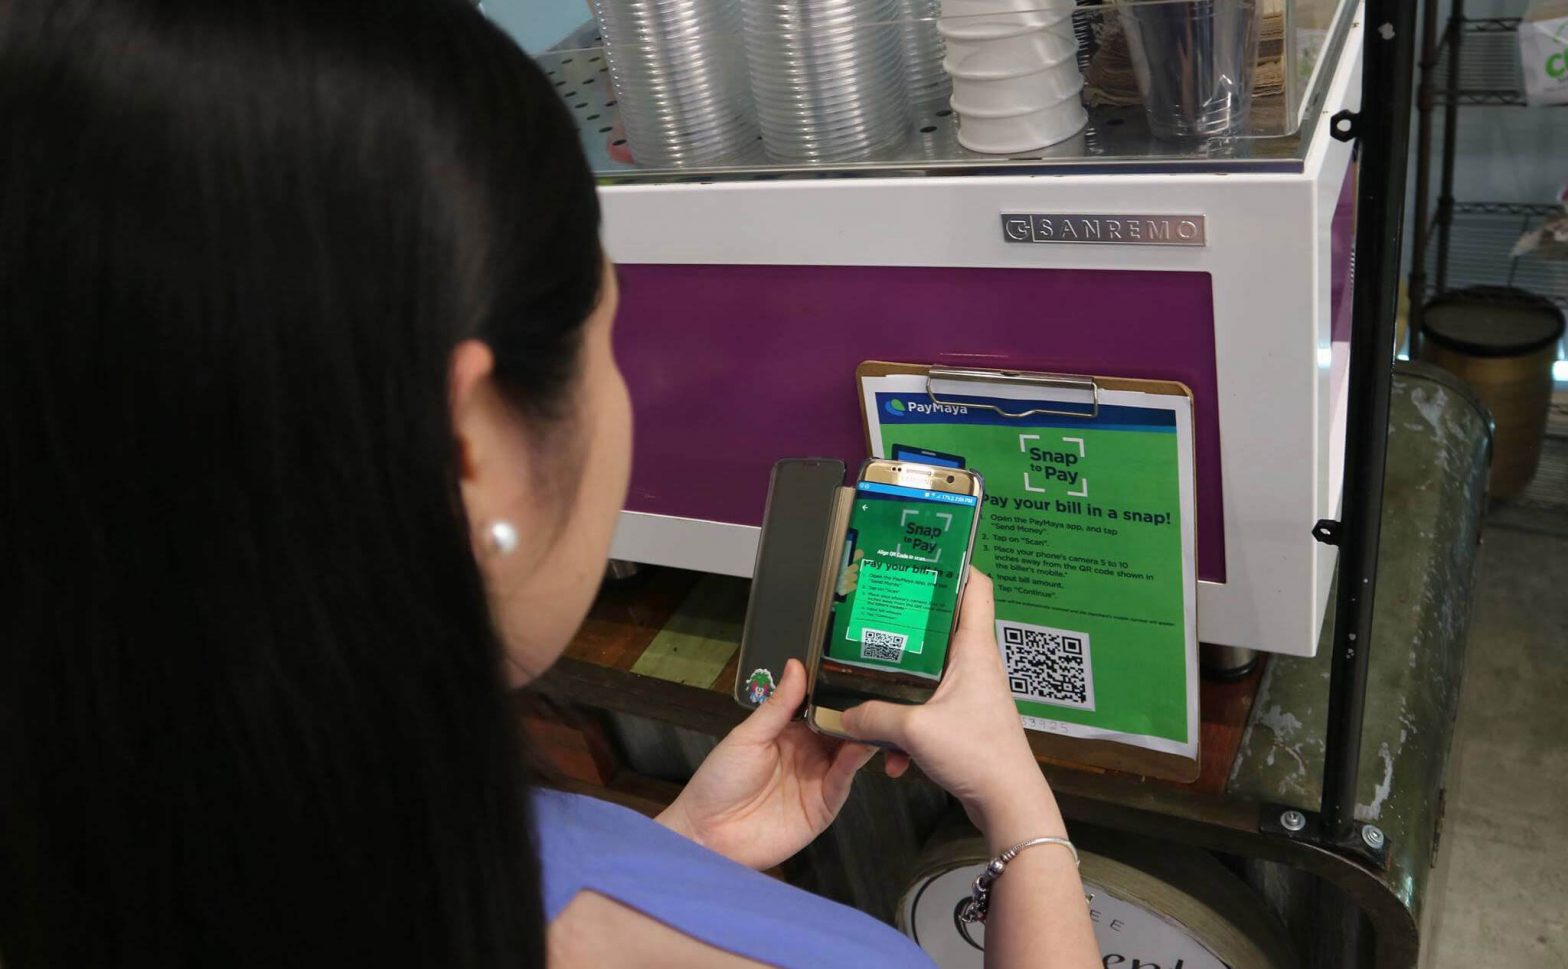 PayMaya, Smart accelerate rollout of QR code payments nationwide